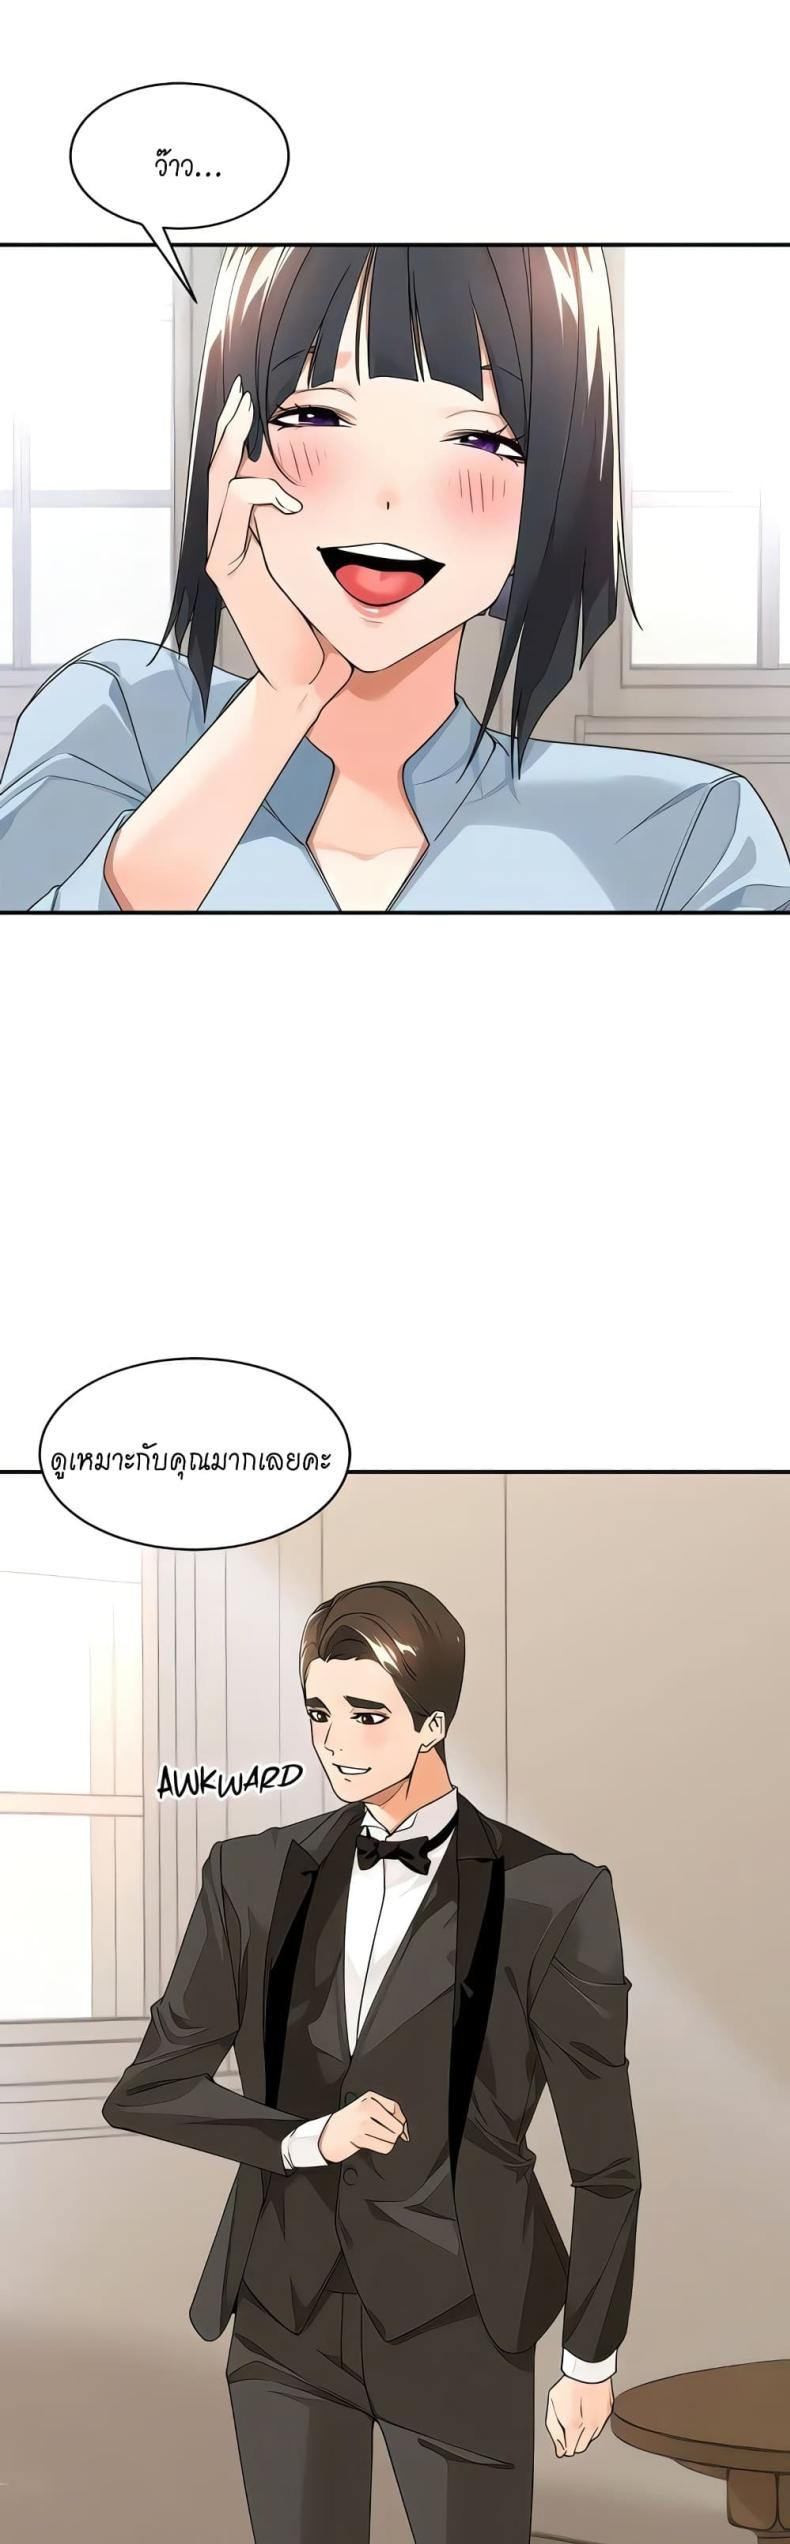 Manager, Please Scold Me 33 ภาพที่ 15